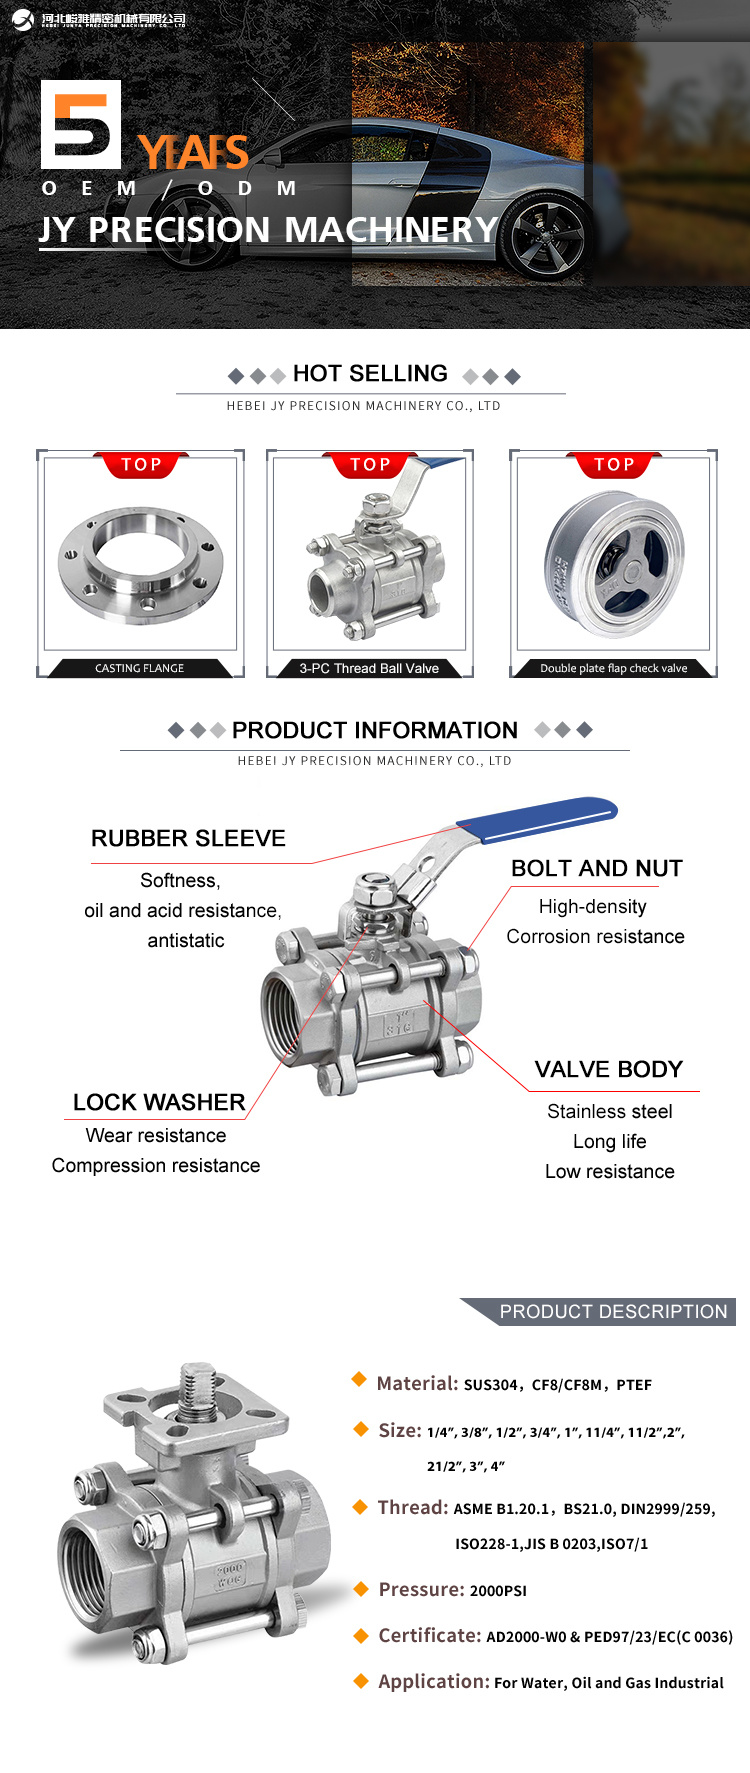 OEM Investment Casting, Customized Stainless Steel Propellor Ball Valve Parts